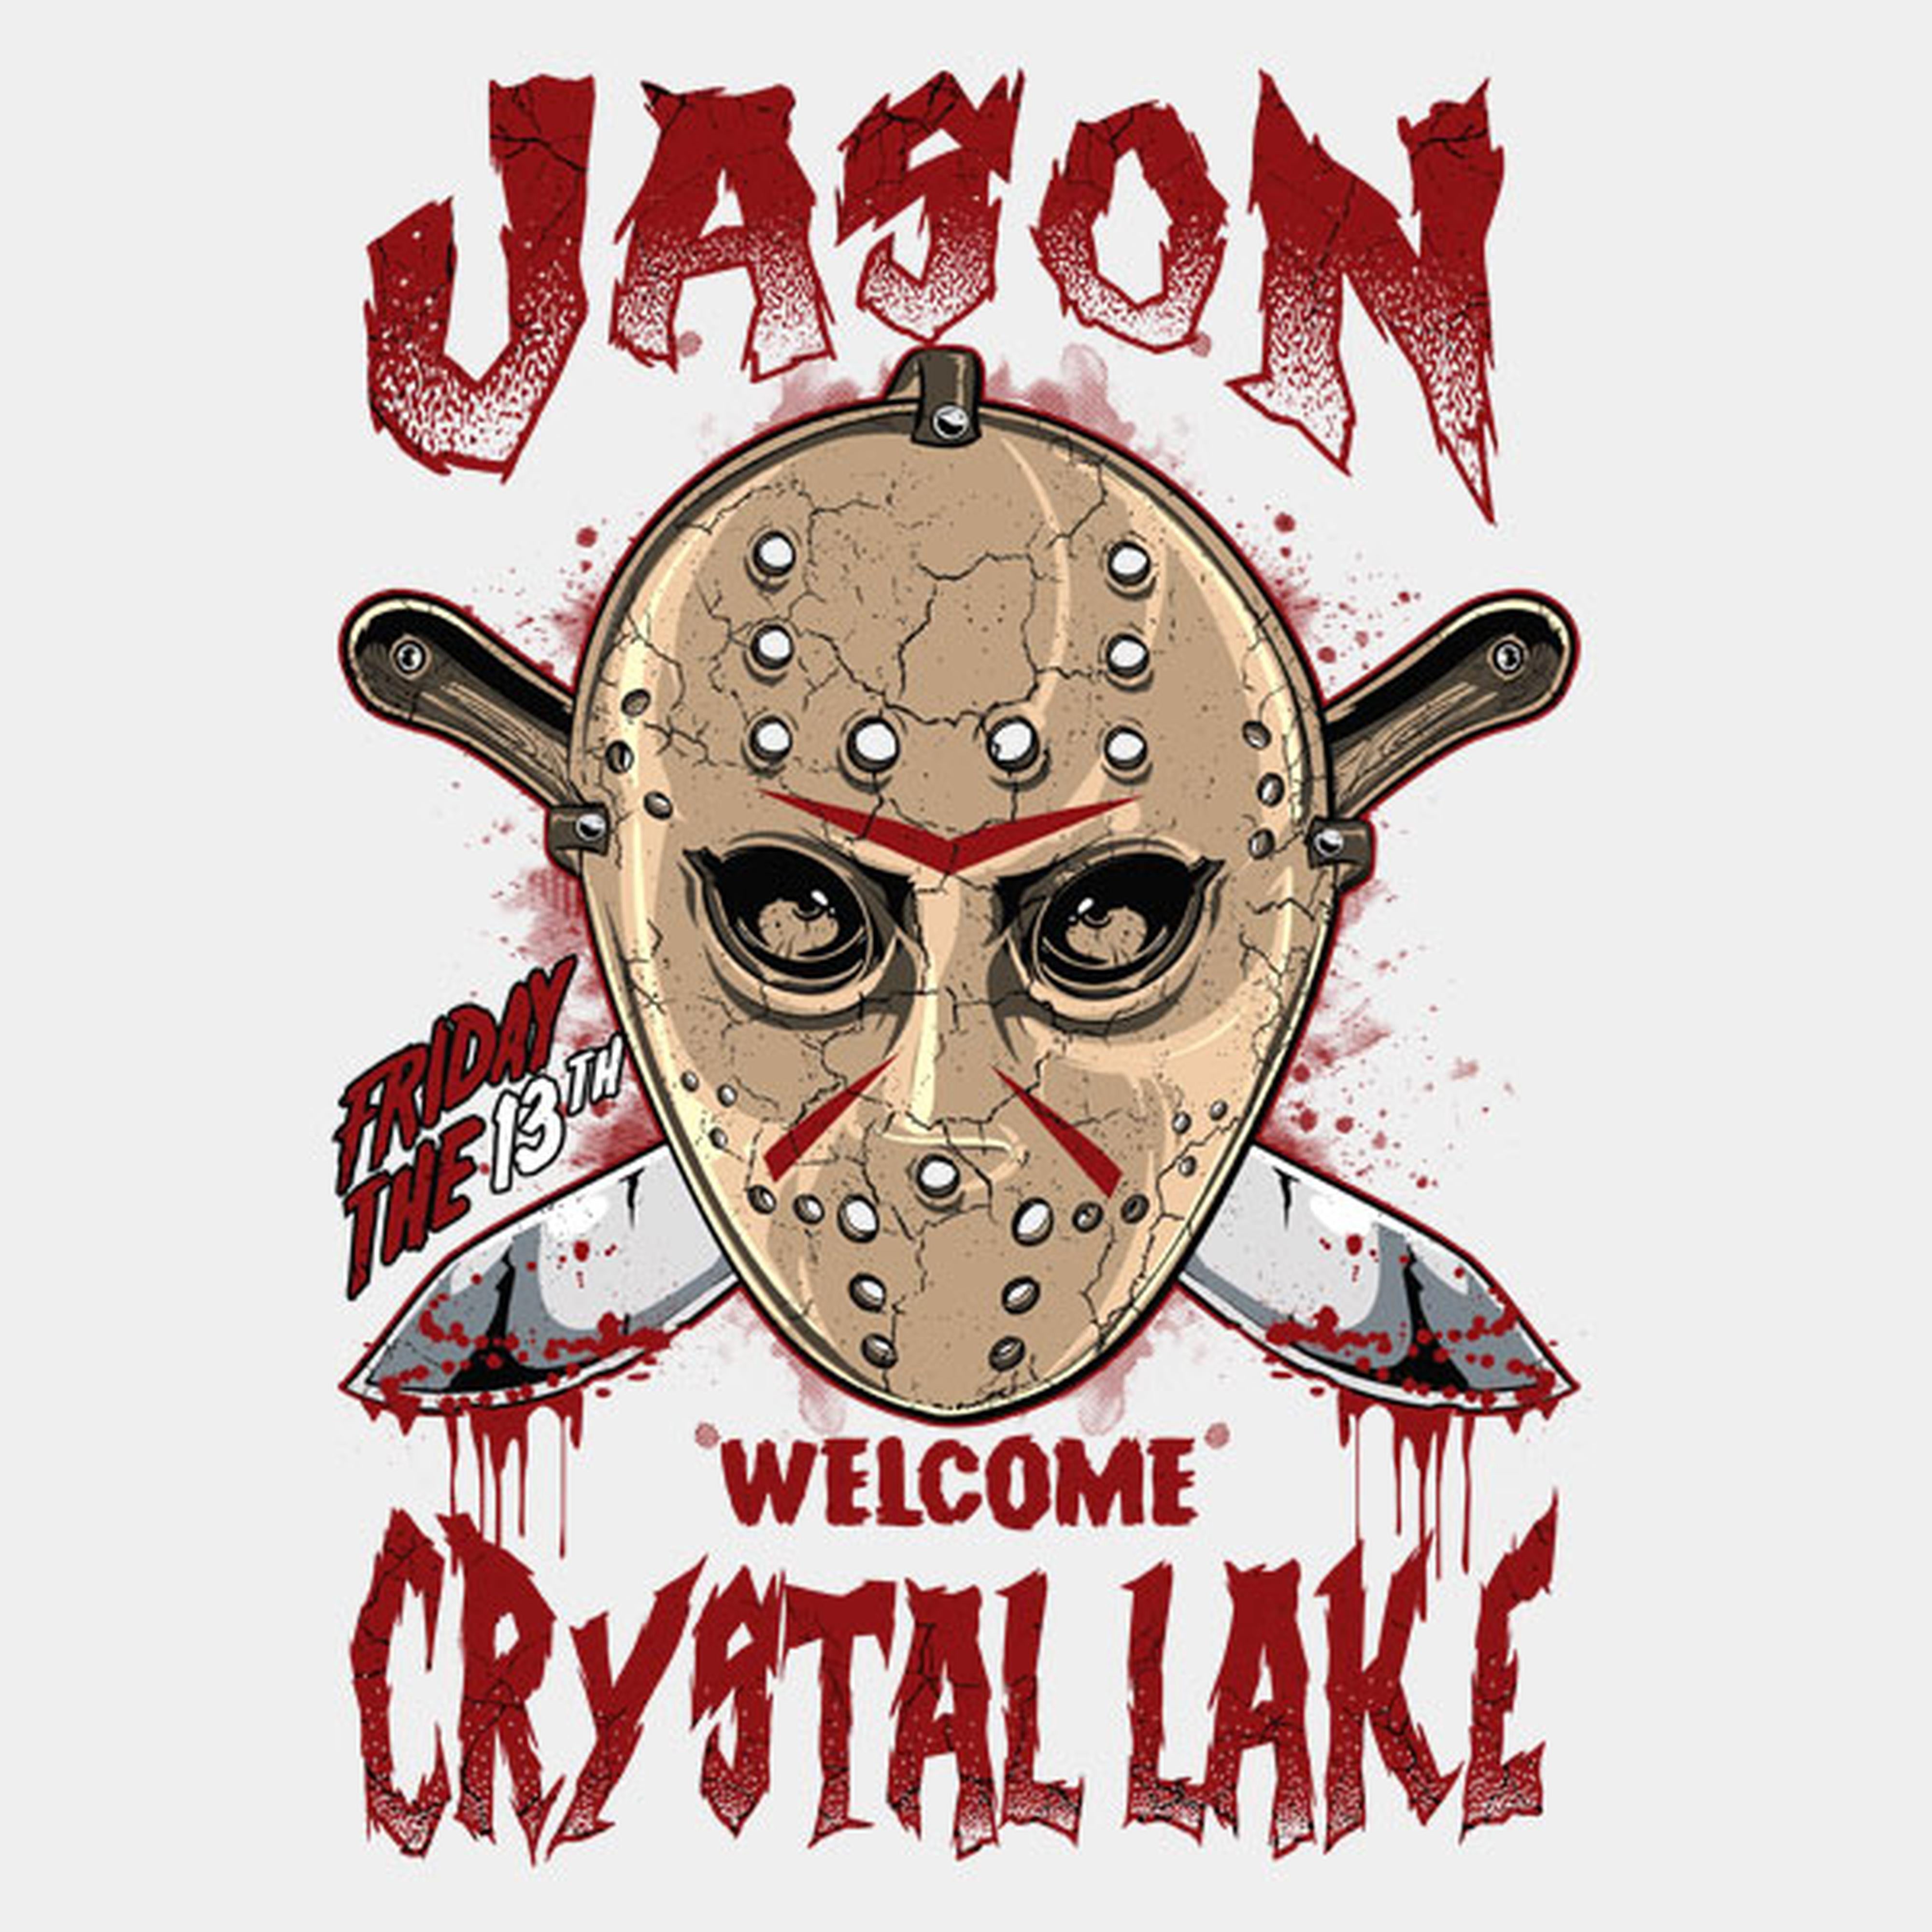 Welcome to Crystal lake - T-shirt